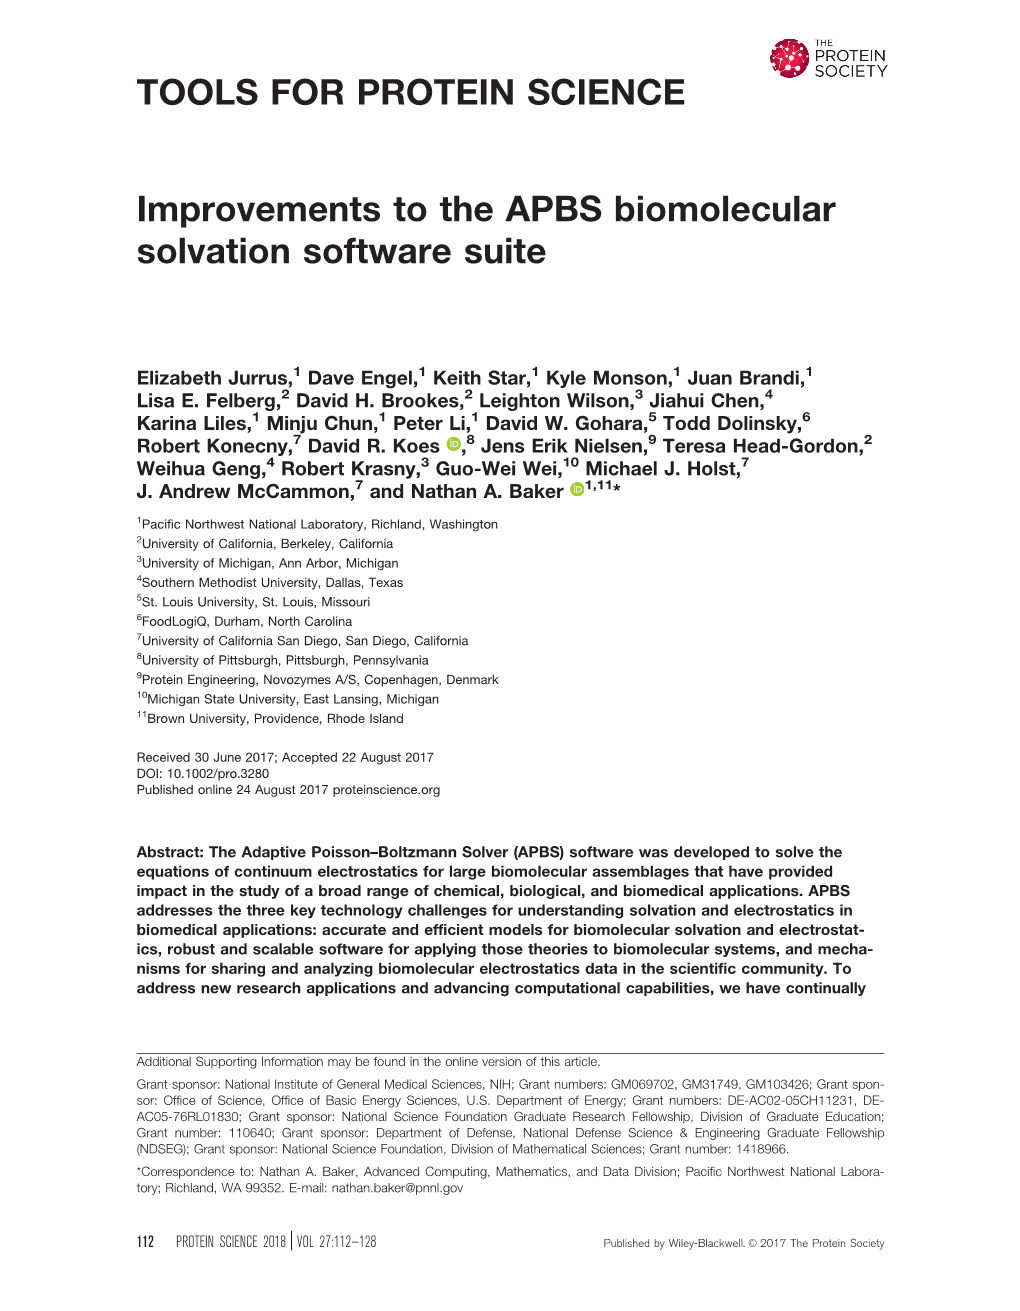 Improvements to the APBS Biomolecular Solvation Software Suite